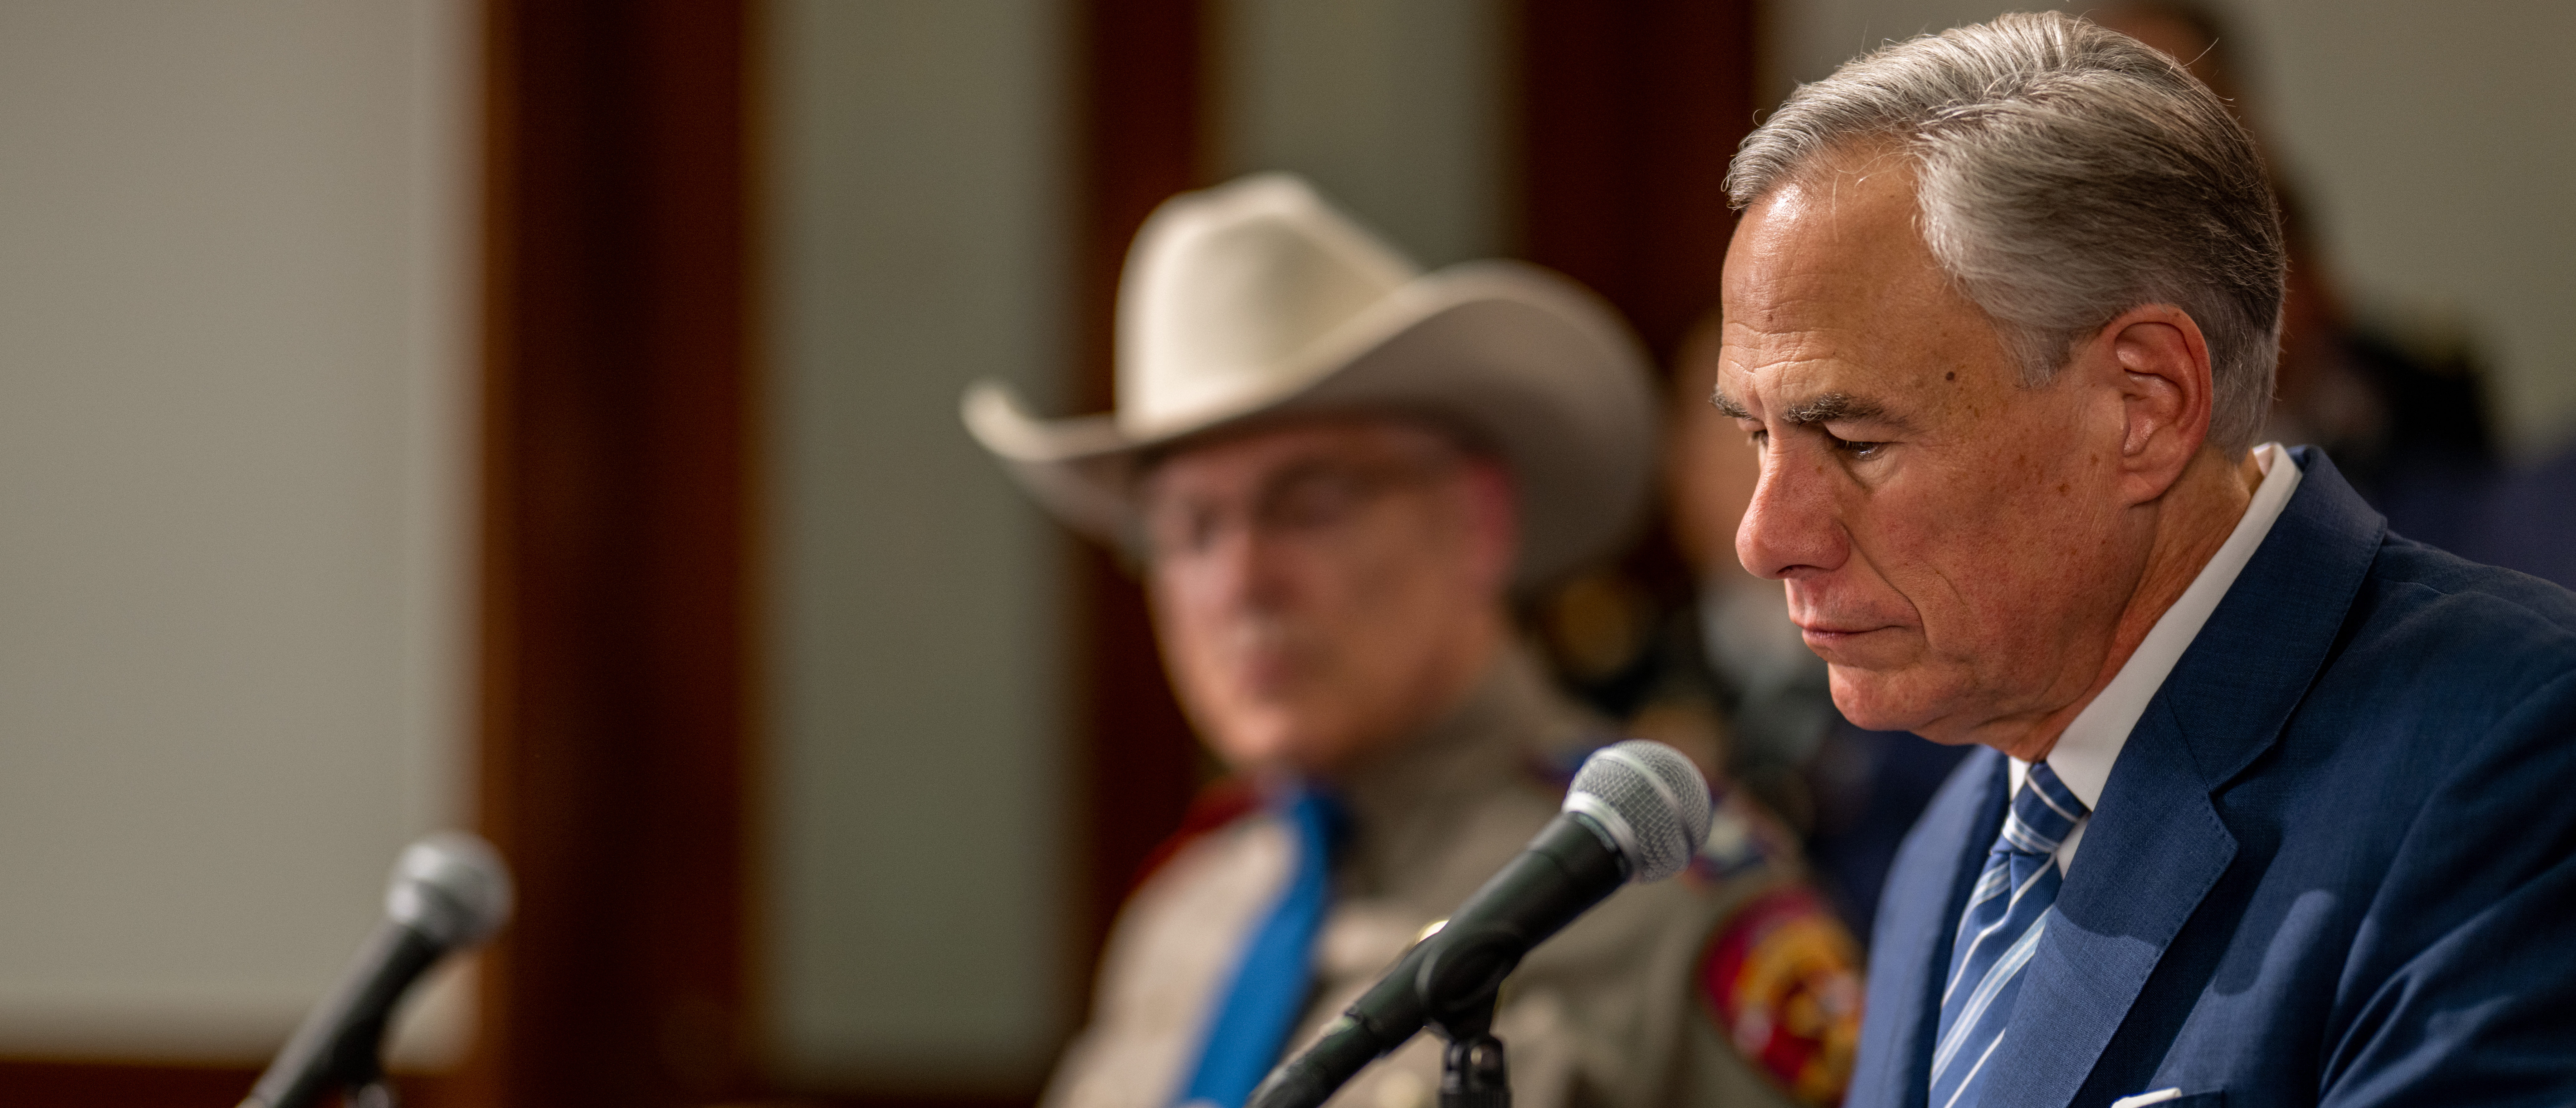 Texas Gov. Greg Abbott glances over a bill before signing during a news conference at the state Capitol on June 08, 2023 in Austin, Texas. Abbott and Texas Department of Public Safety Director Steve McCraw joined bill authors, sponsors, legislators and law enforcement members in the signing of bills aimed at enhancing southern border security. (Photo by Brandon Bell/Getty Images)